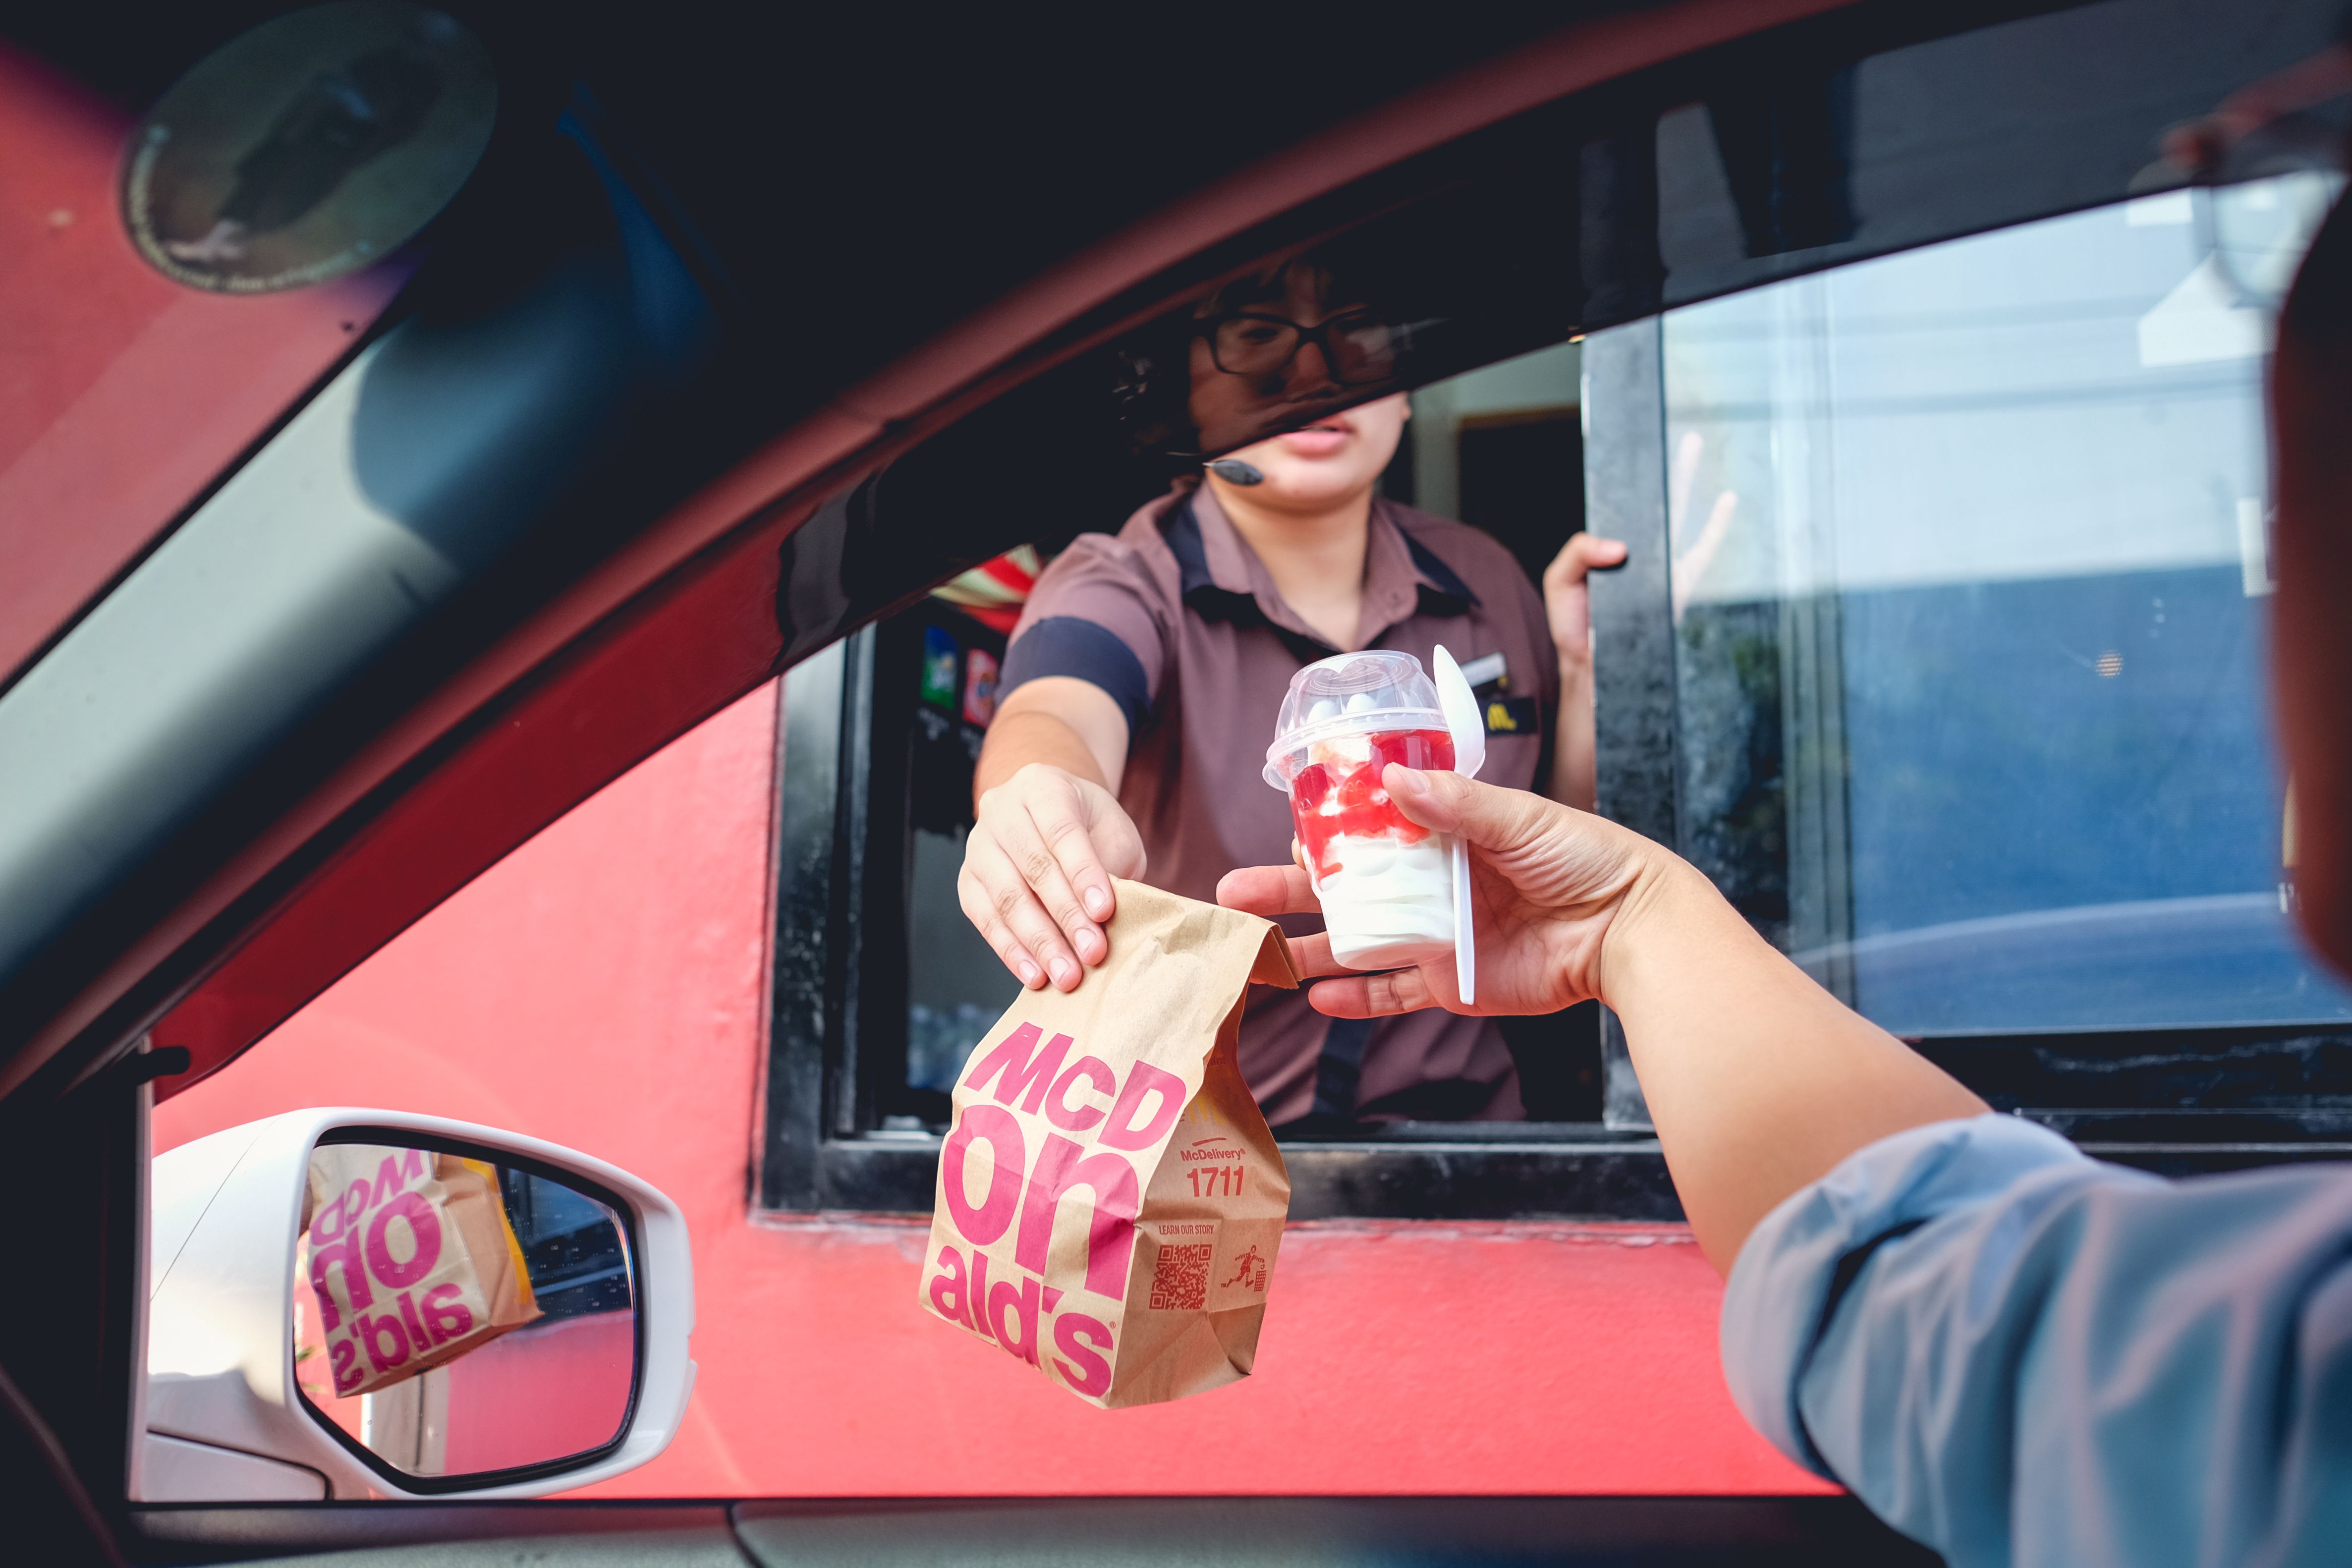 Drive-thru or order inside: What's the quickest way to get your fast food?